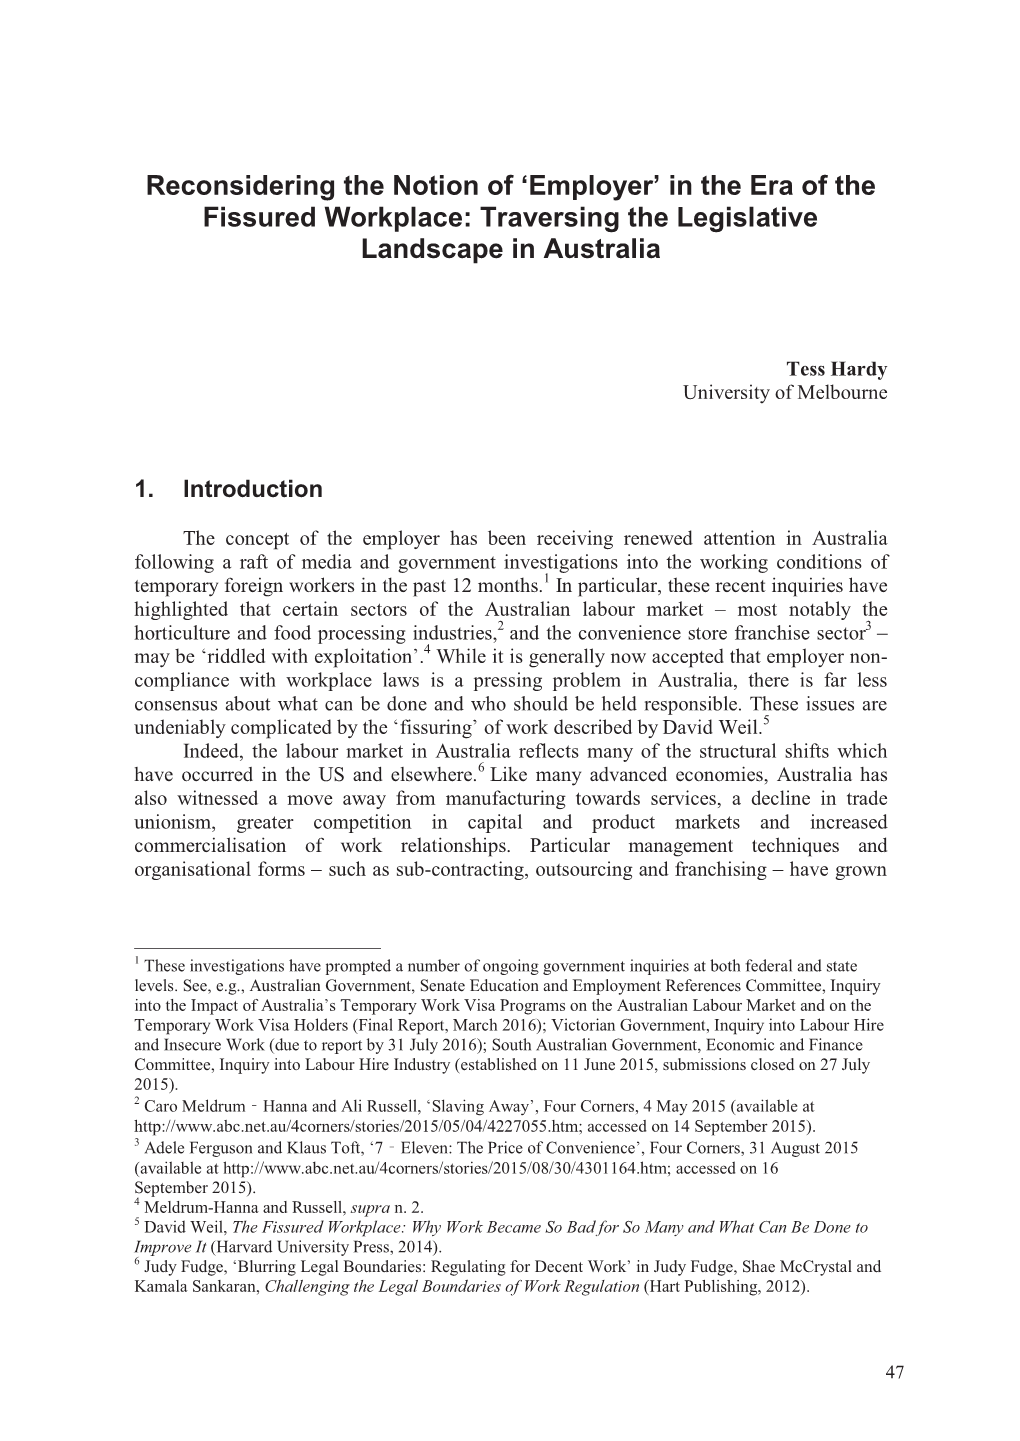 Reconsidering the Notion of Employer in the Era of the Fissured Workplace: Traversing the Legislative Landscape in Australia